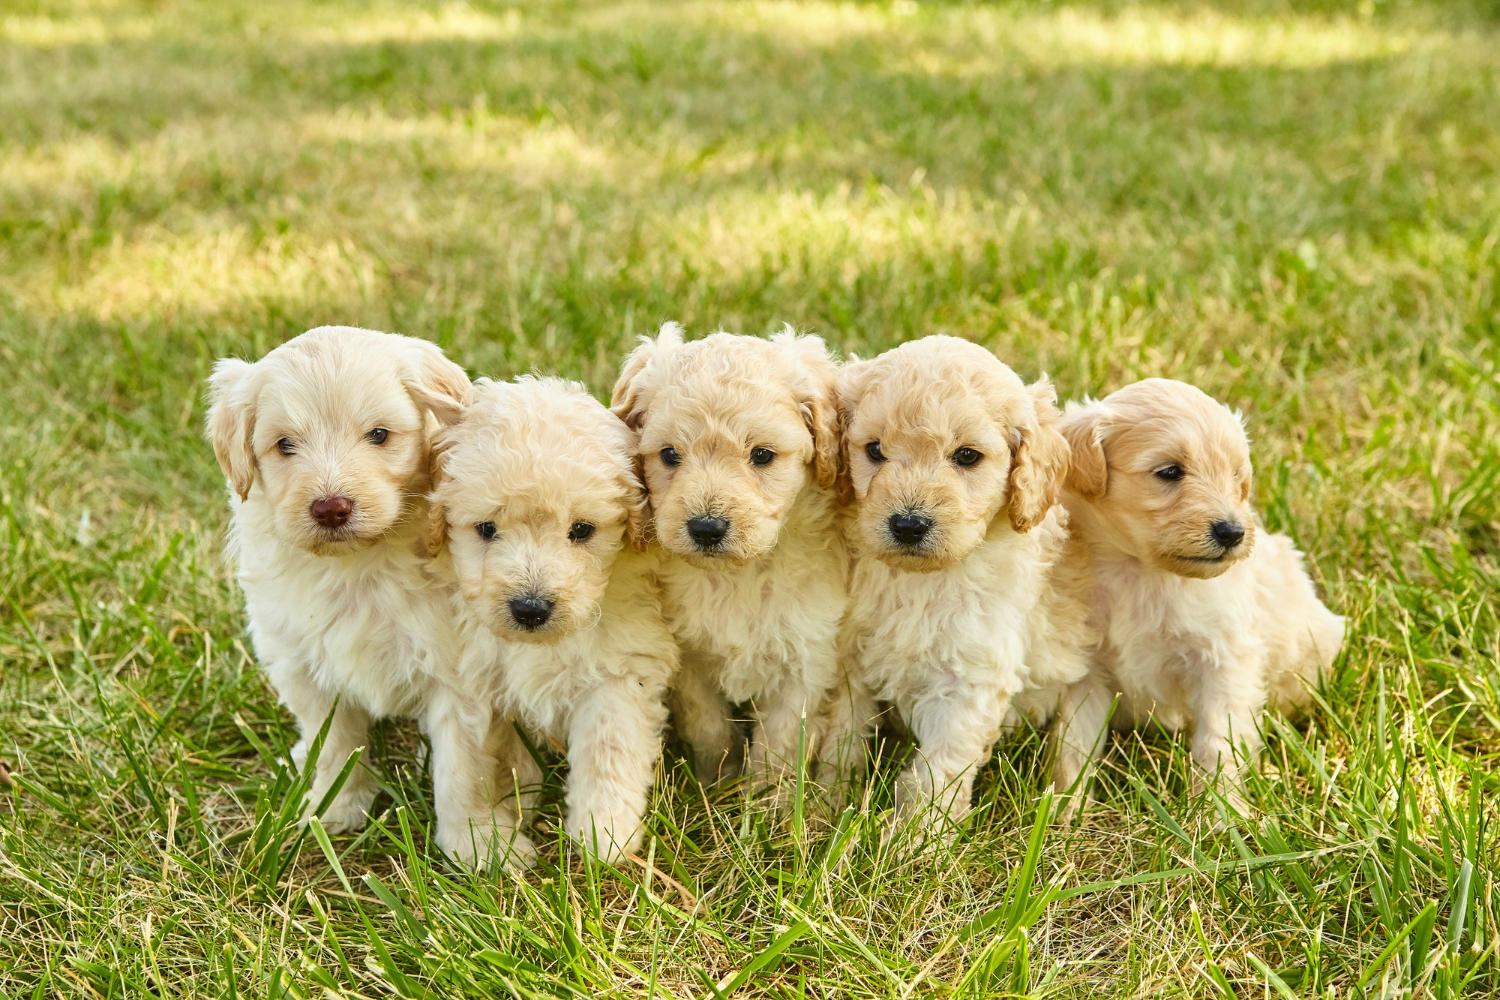 "The Best Food for Goldendoodles: What to Feed Your Furry Friend"